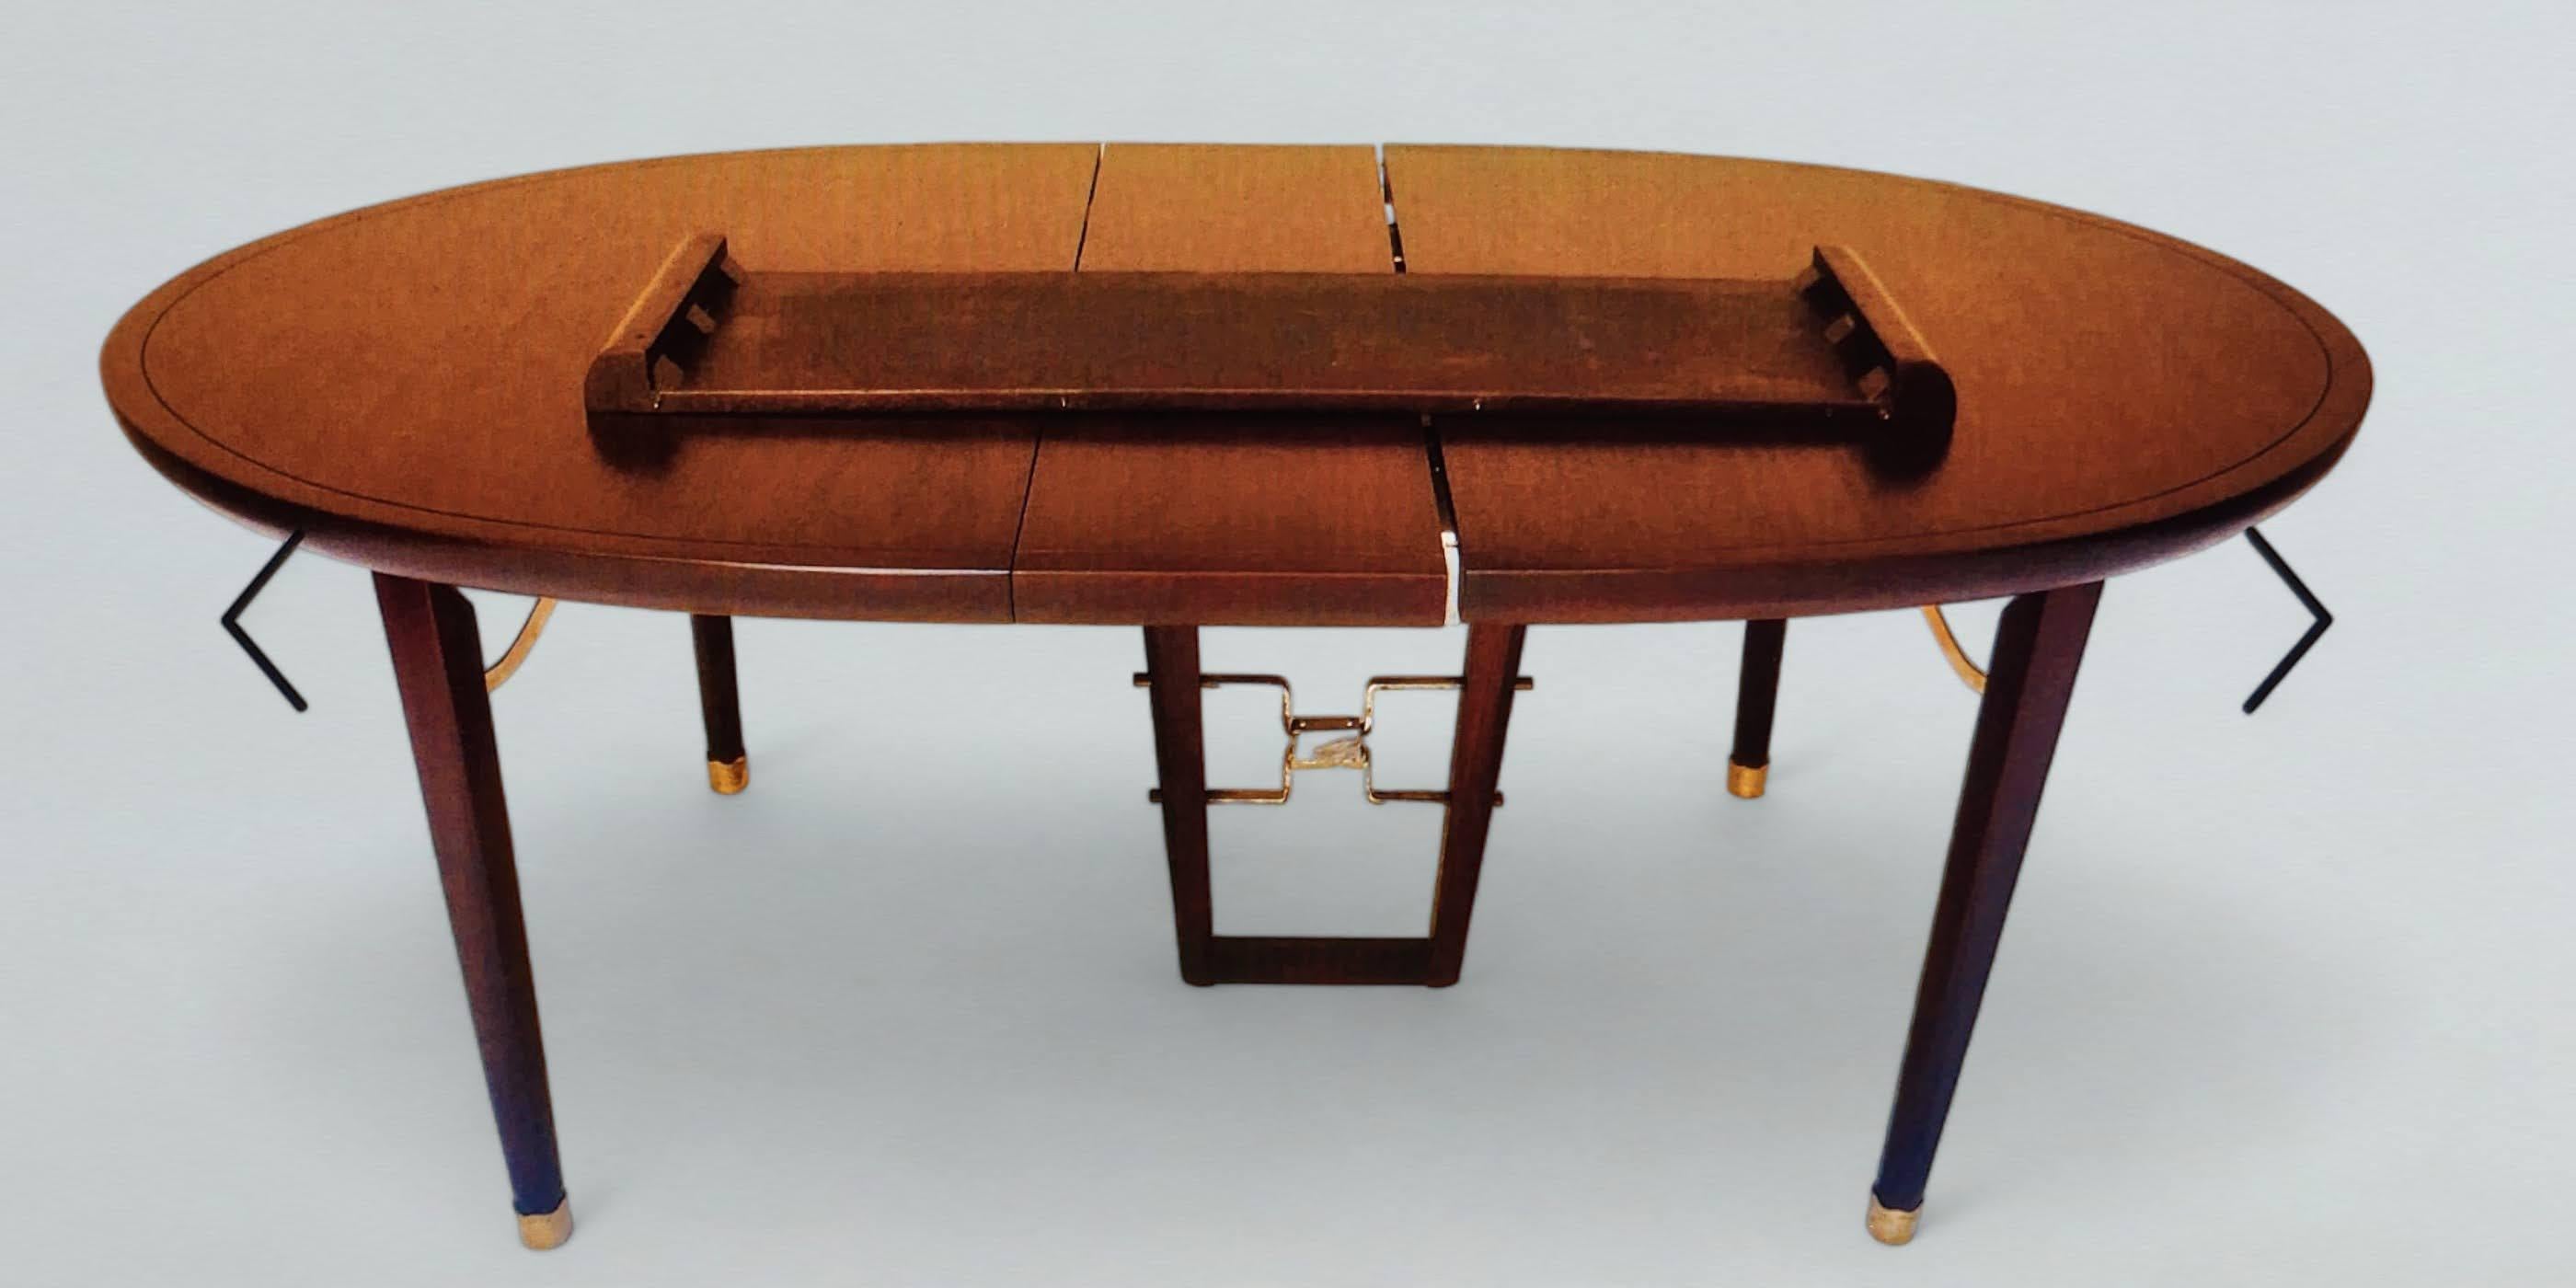 Mid-20th Century Edmond Spence Six Piece Mahogany Dinning Set for Industria Mueblera, S.A. 1950s  For Sale